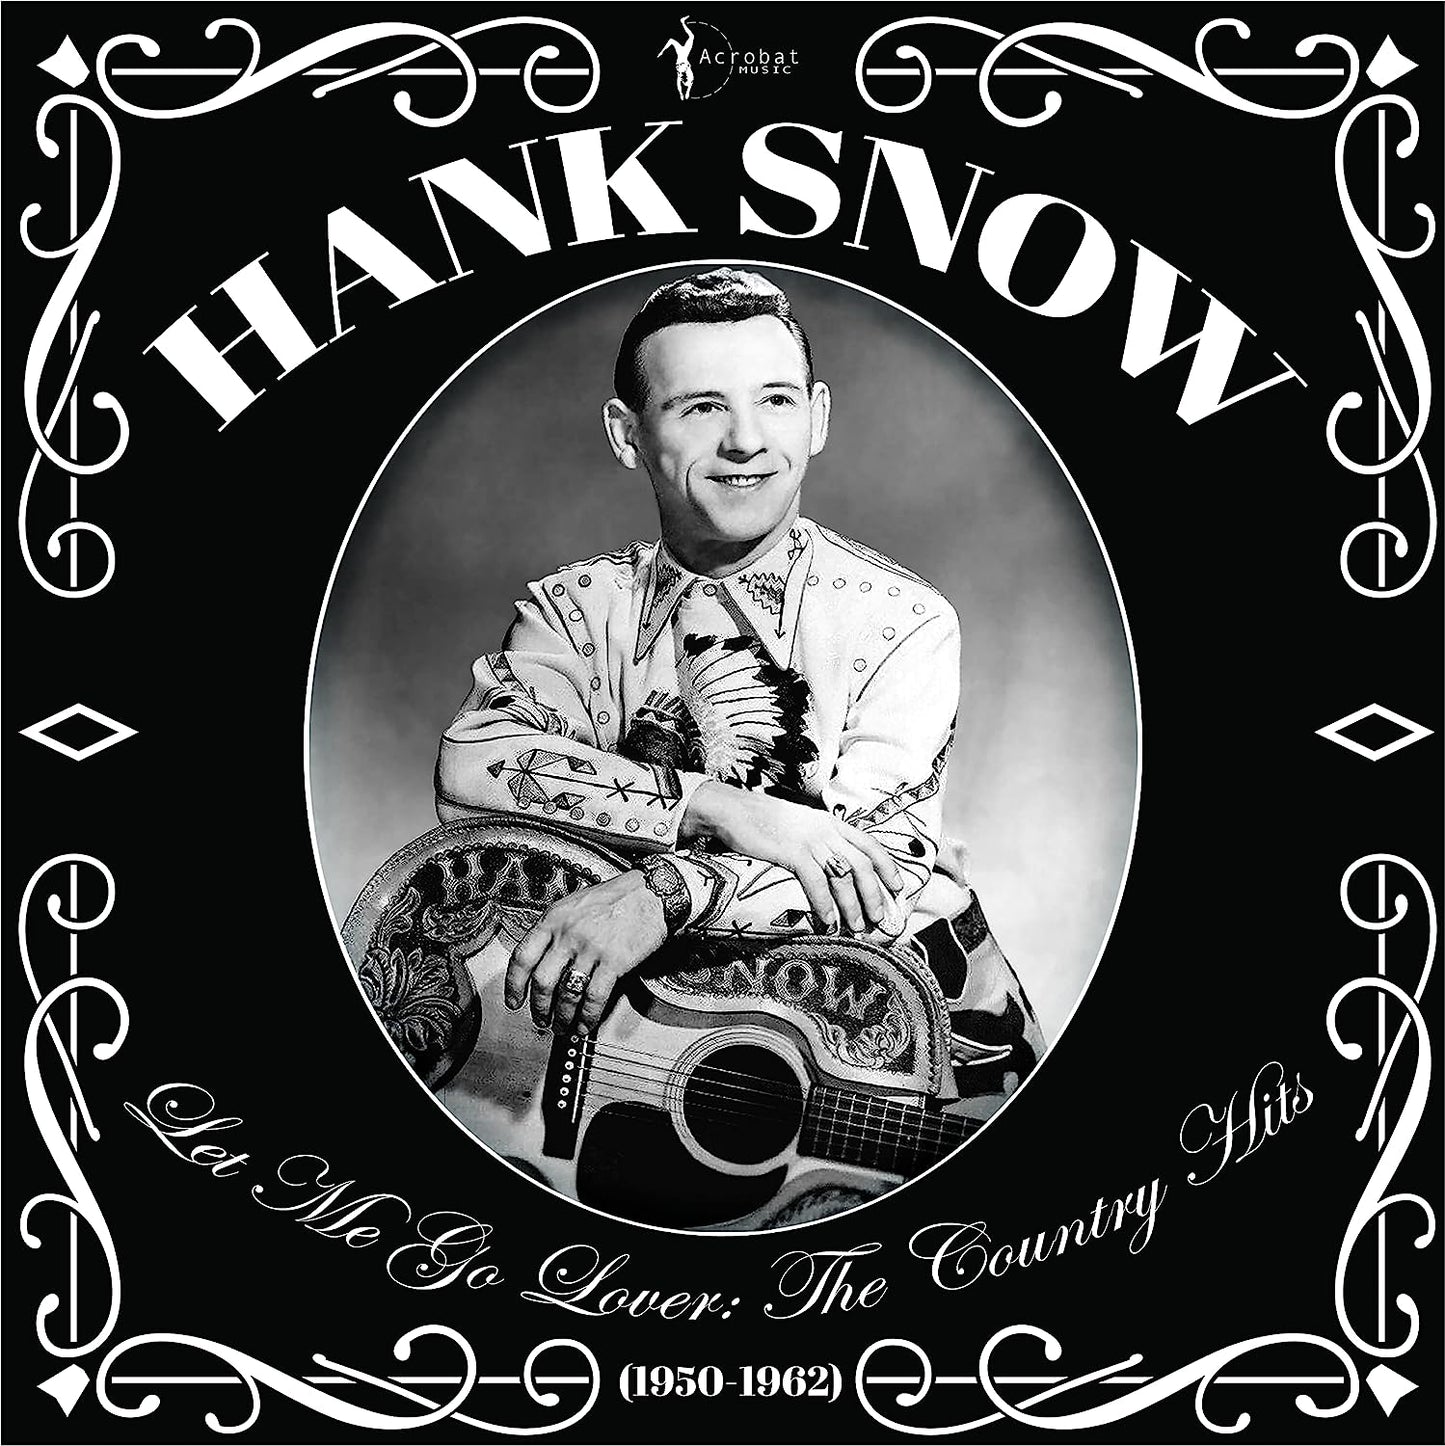 Snow, Hank/Let Me Go Lover: The Country Hits 1950-1962 [LP]